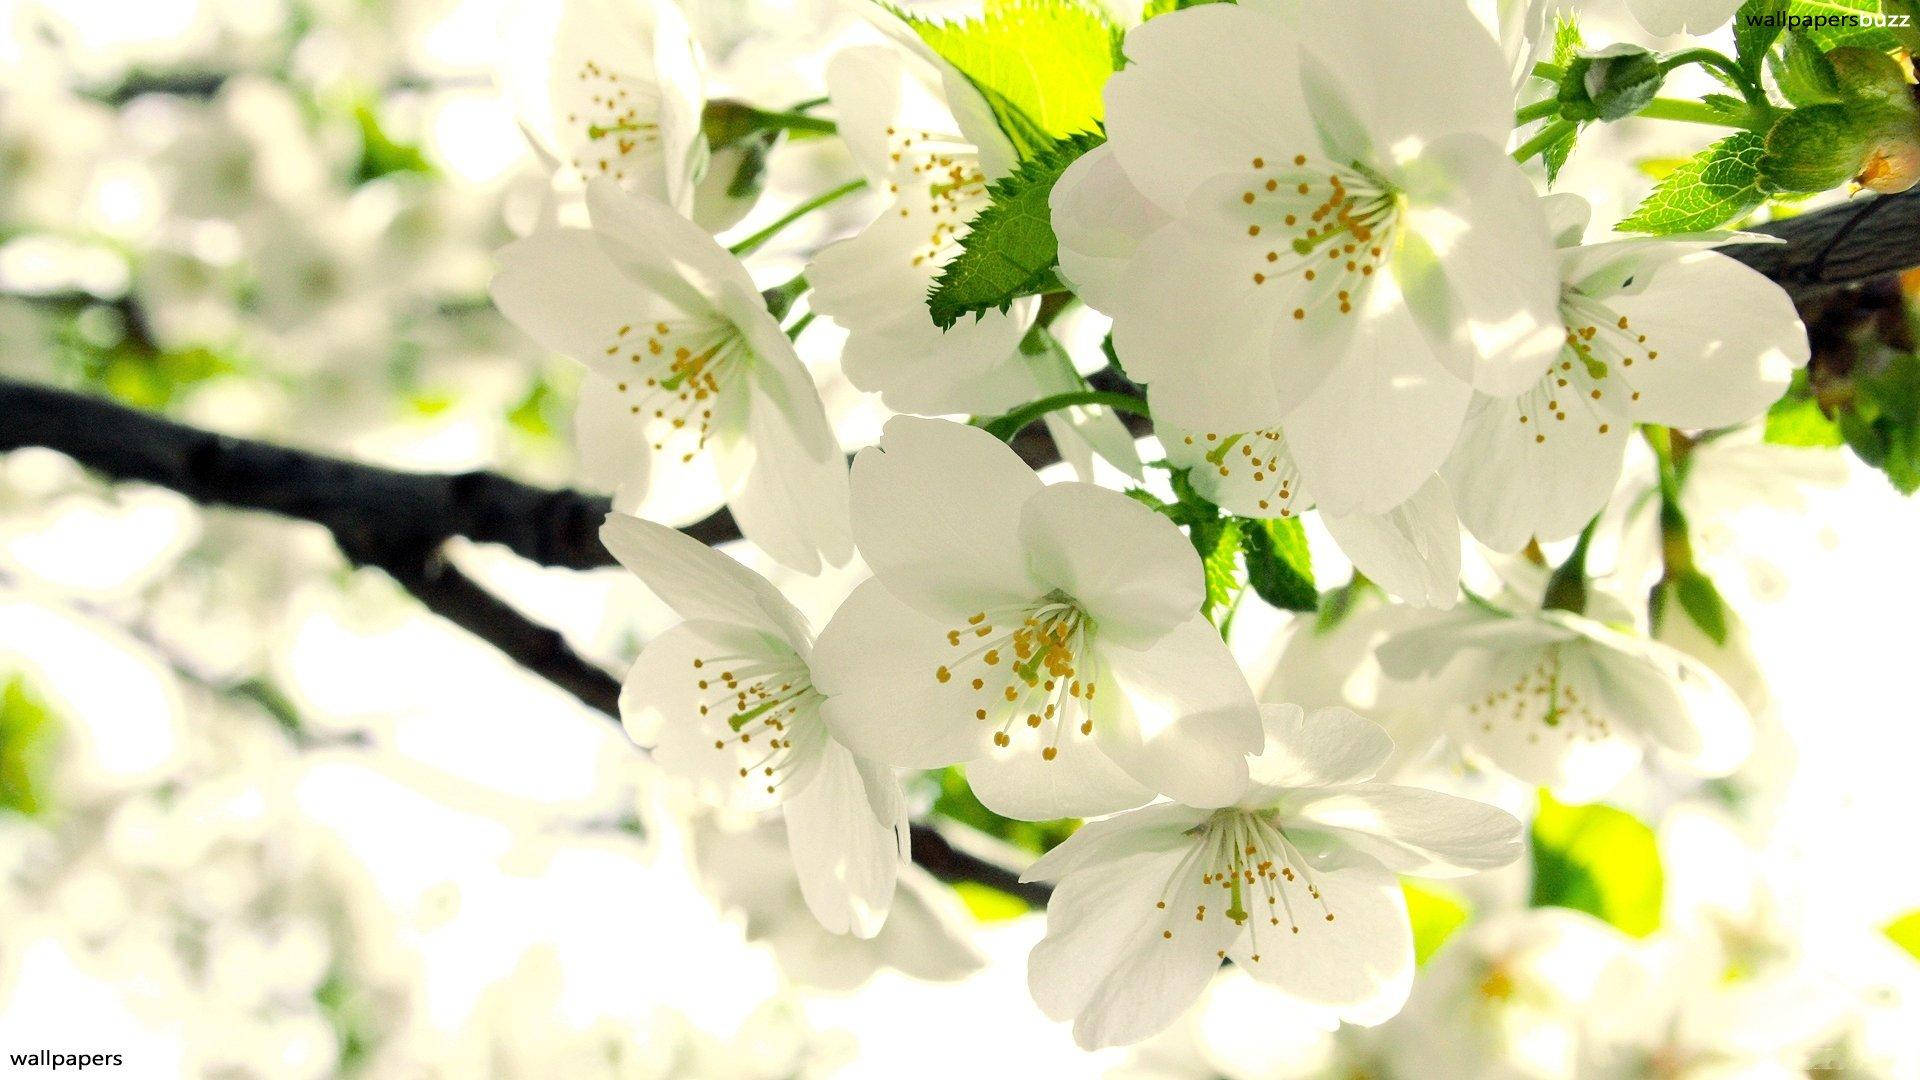 Majestic Beauty of a Solitary White Flower Wallpaper